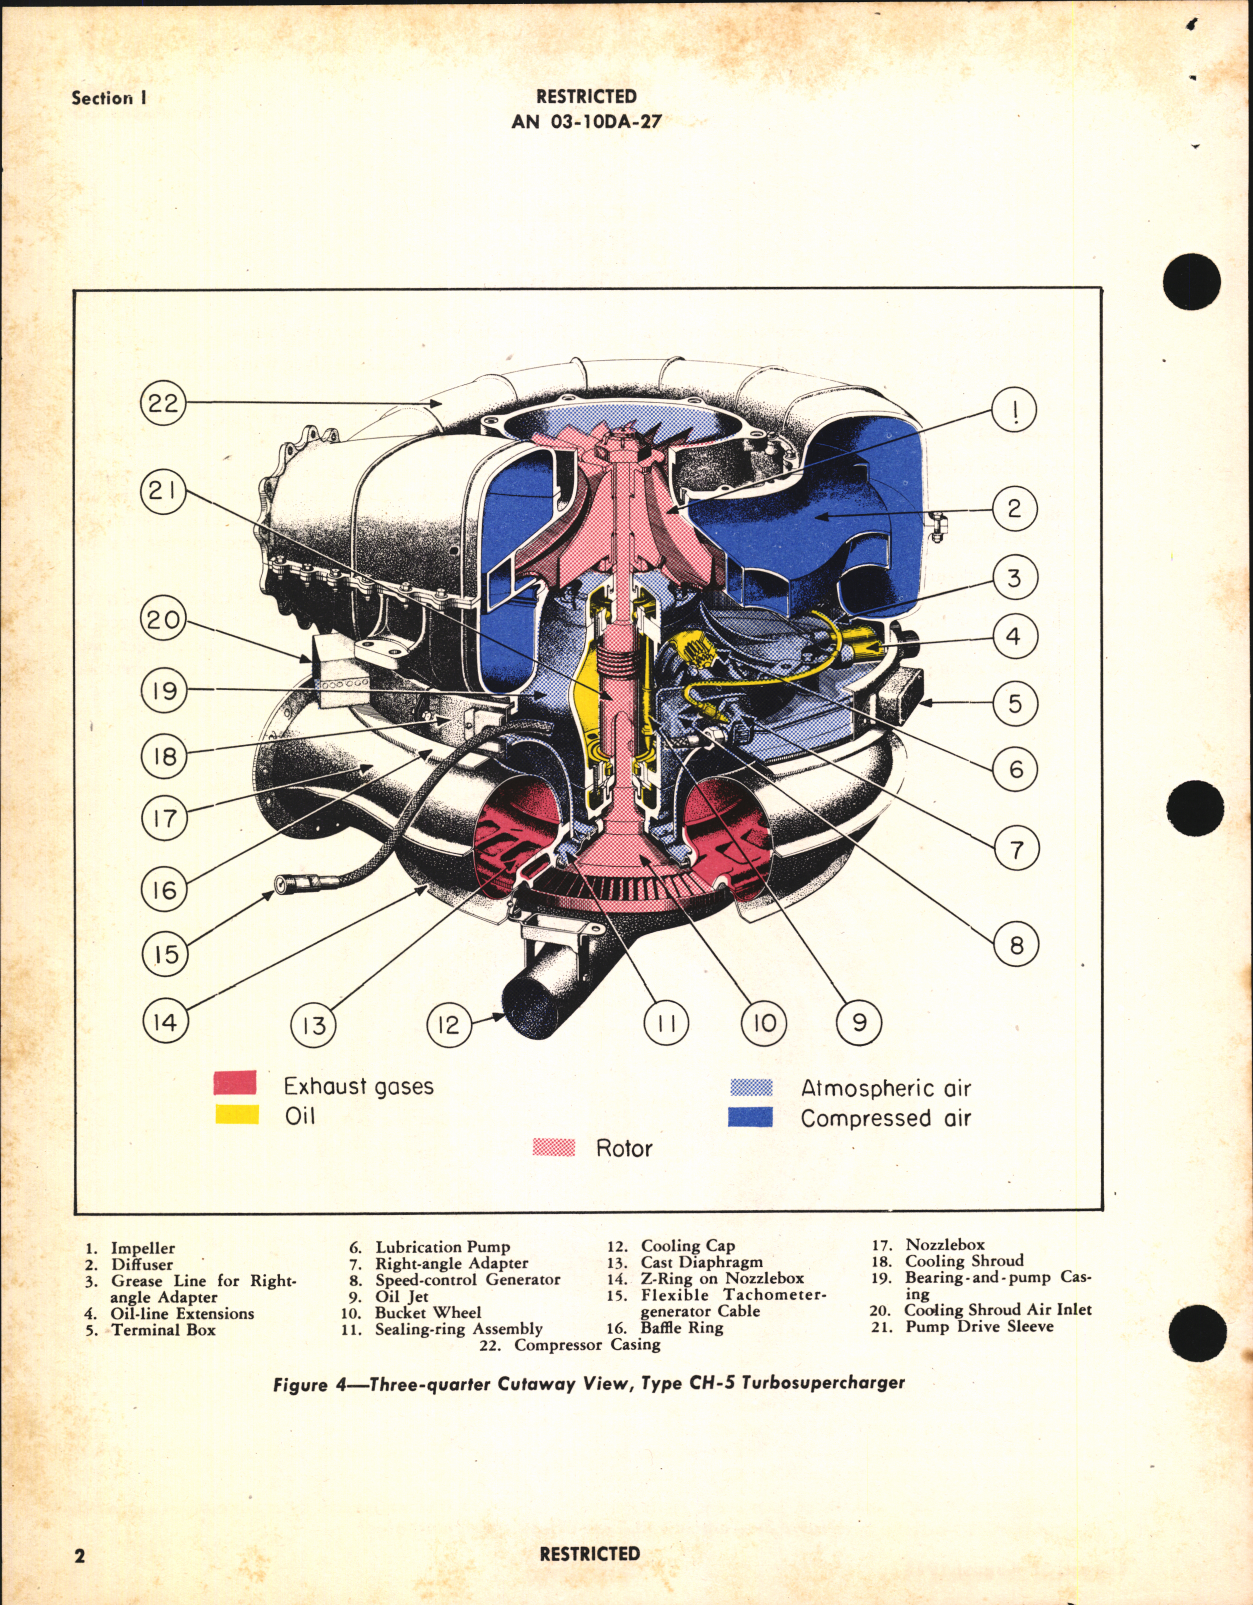 Sample page 6 from AirCorps Library document: Operation, Service, & Overhaul Instructions with Parts Catalog for Turbosuperchargers CH-5 Series